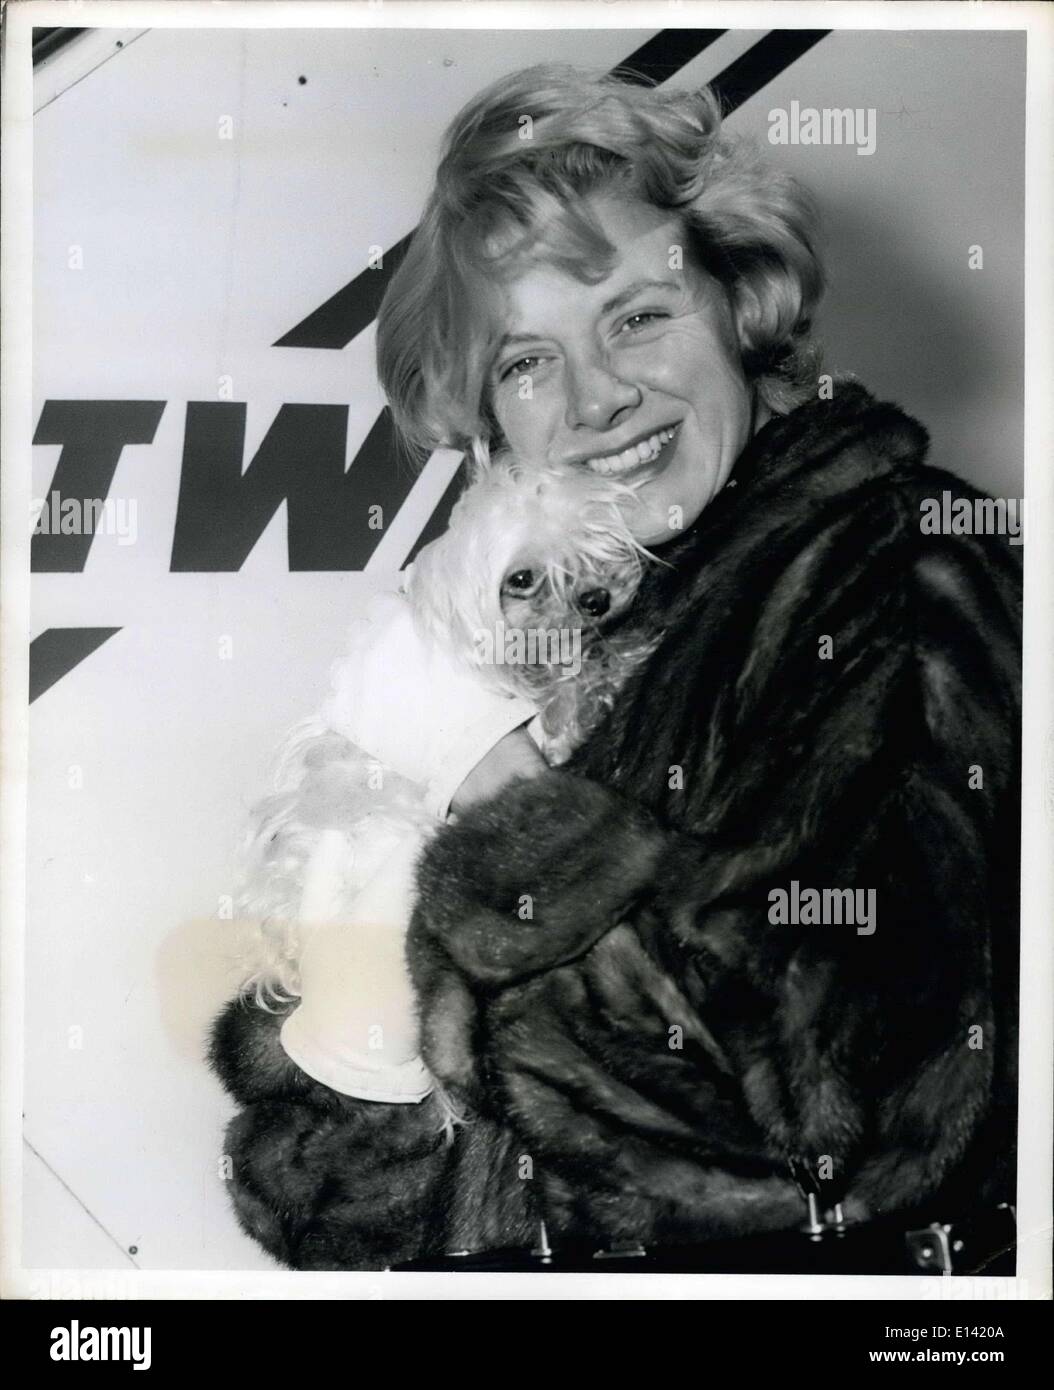 Mar. 31, 2012 - Songbird Rosemary Clooney, Her Hair Blowing In The Breeze, Takes A Moment To Have Her Picture Taken With Her Pet ''Schnookie'' Prior To Boarding A TWA Jetstream To Los Angeles. Miss Clooney, The Wife Of Actor-Director Jose Ferrer And The Mother Of Four Ranging In Age From 4 Months To 4 Years, Is Returning To Her Family Following A Three Week Visit In Town. Stock Photo